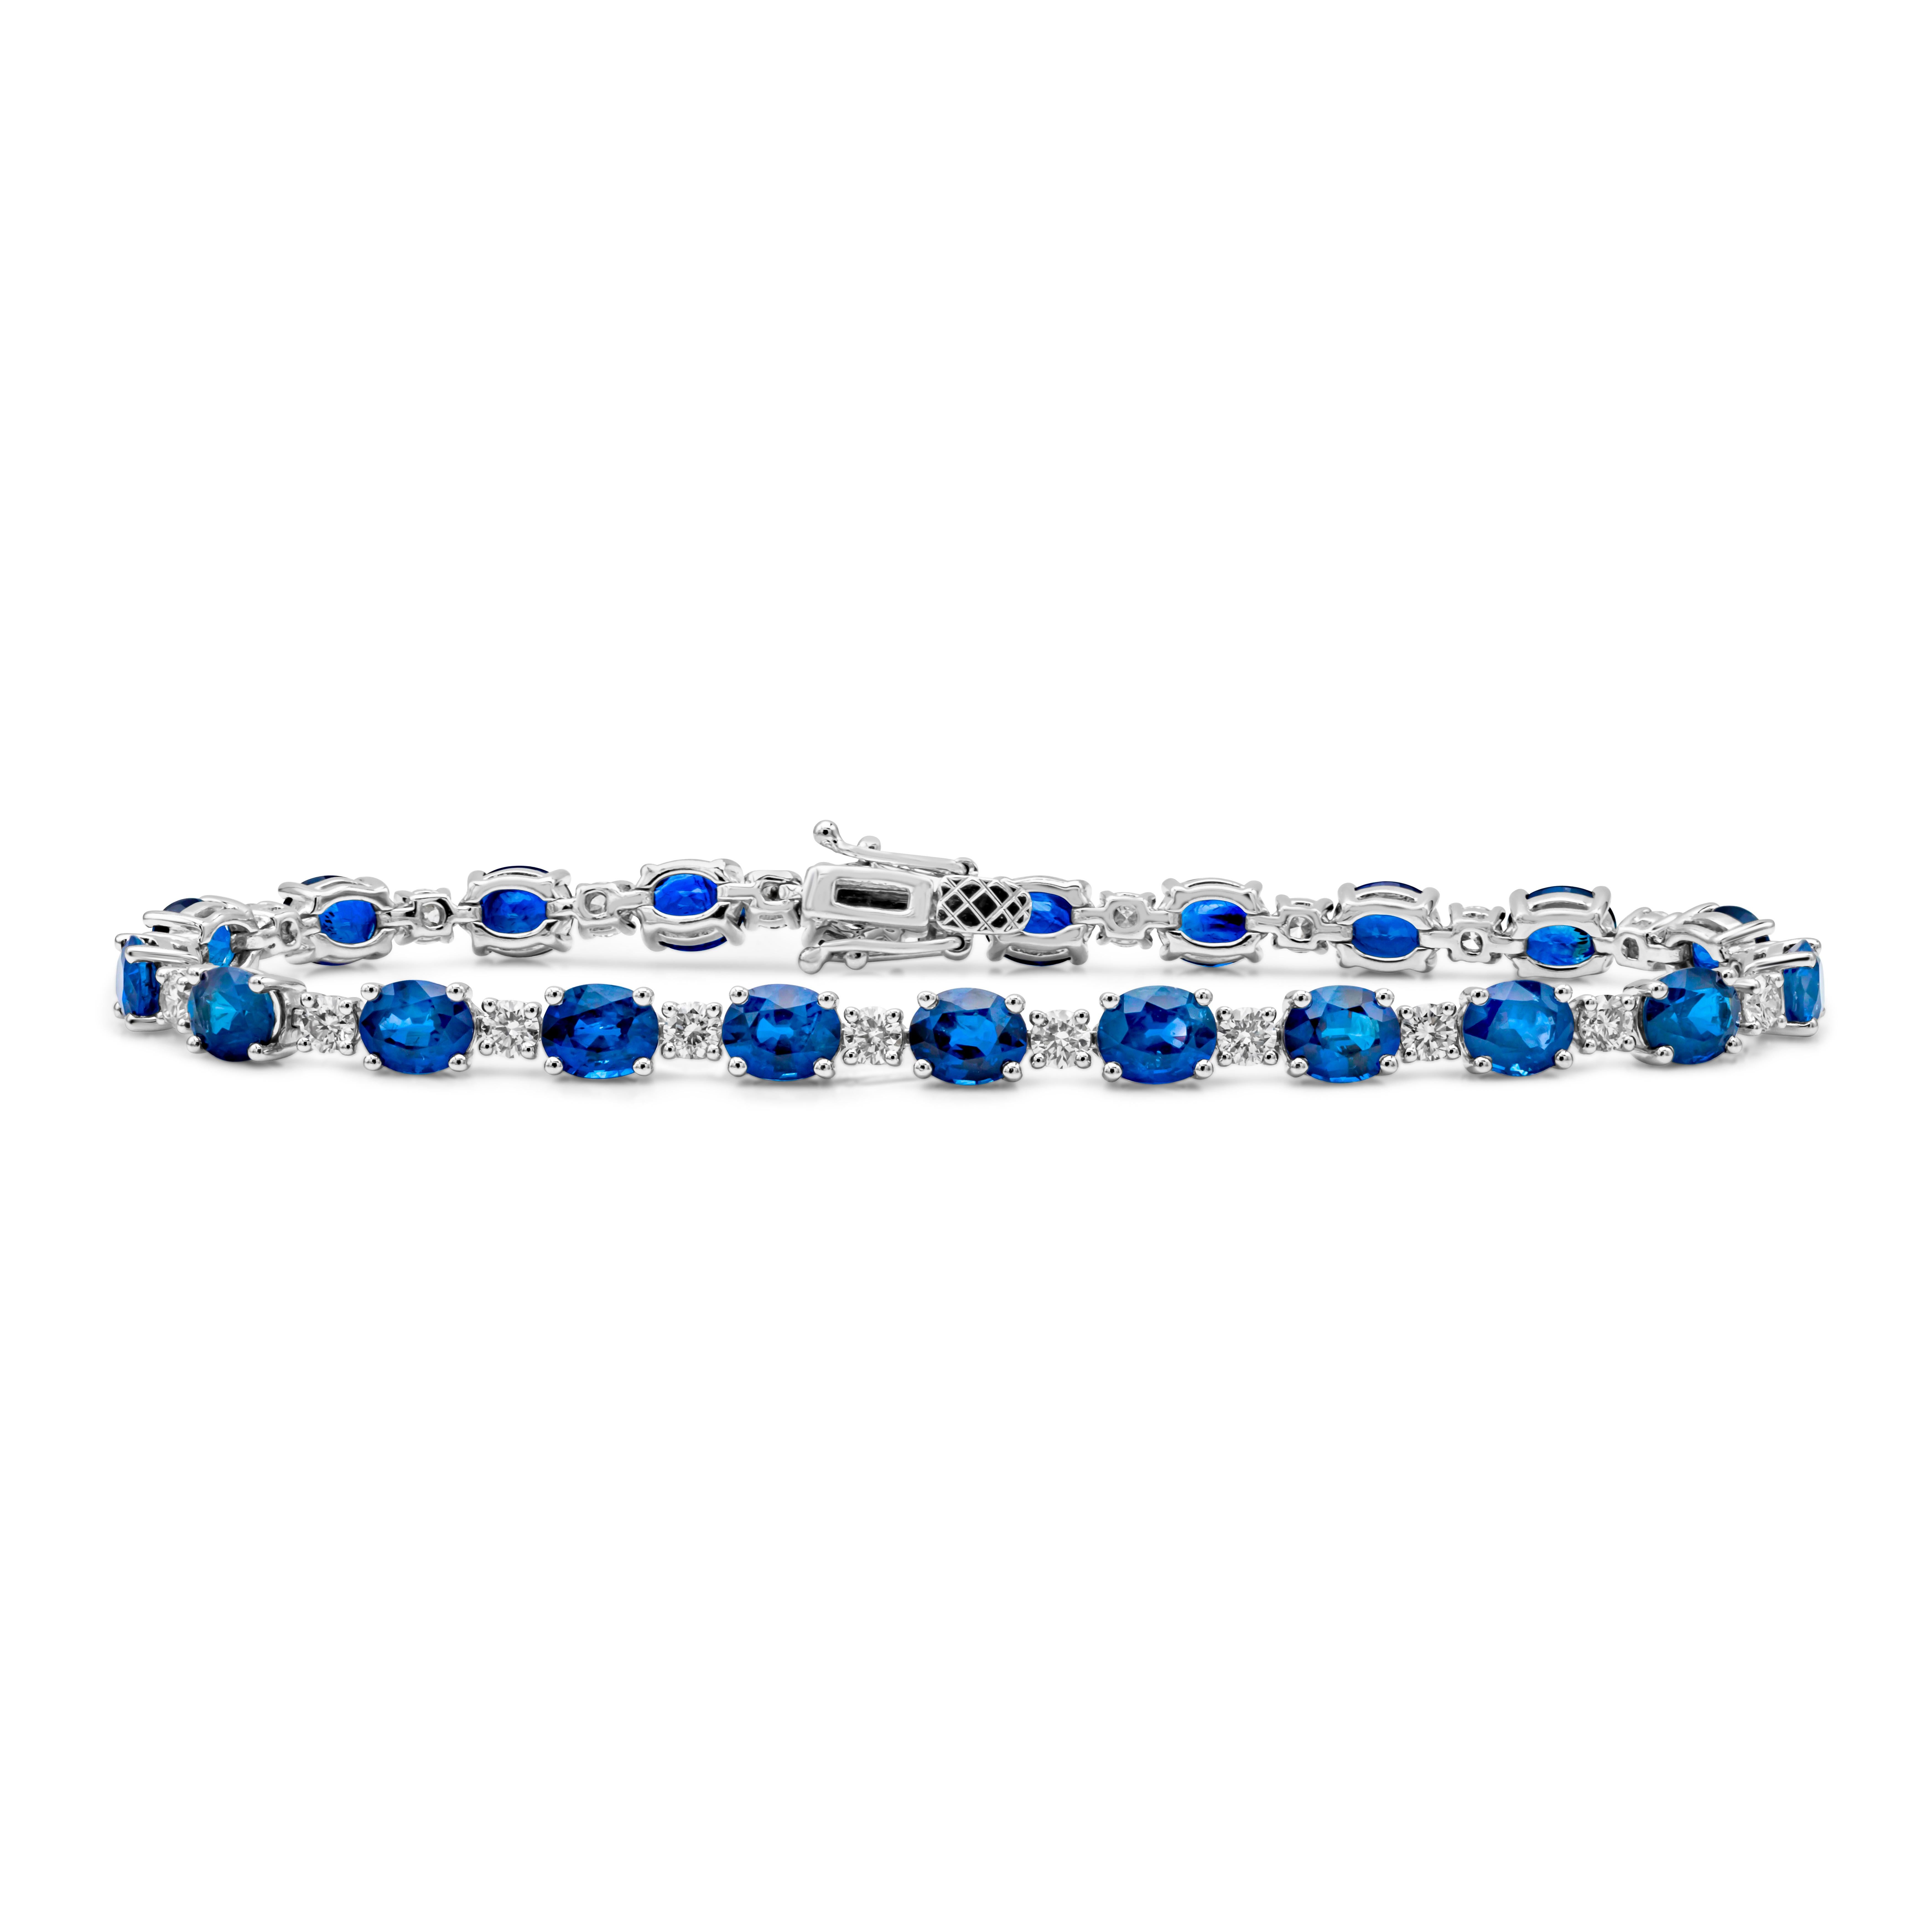 This beautiful tennis bracelet showcases a color-rich oval cut blue sapphires weighing 12.56 carats total, set in a classic four prong setting. Evenly spaced by brilliant round cut diamonds weighing 1.67 carats total, G color and VS2 in clarity, set